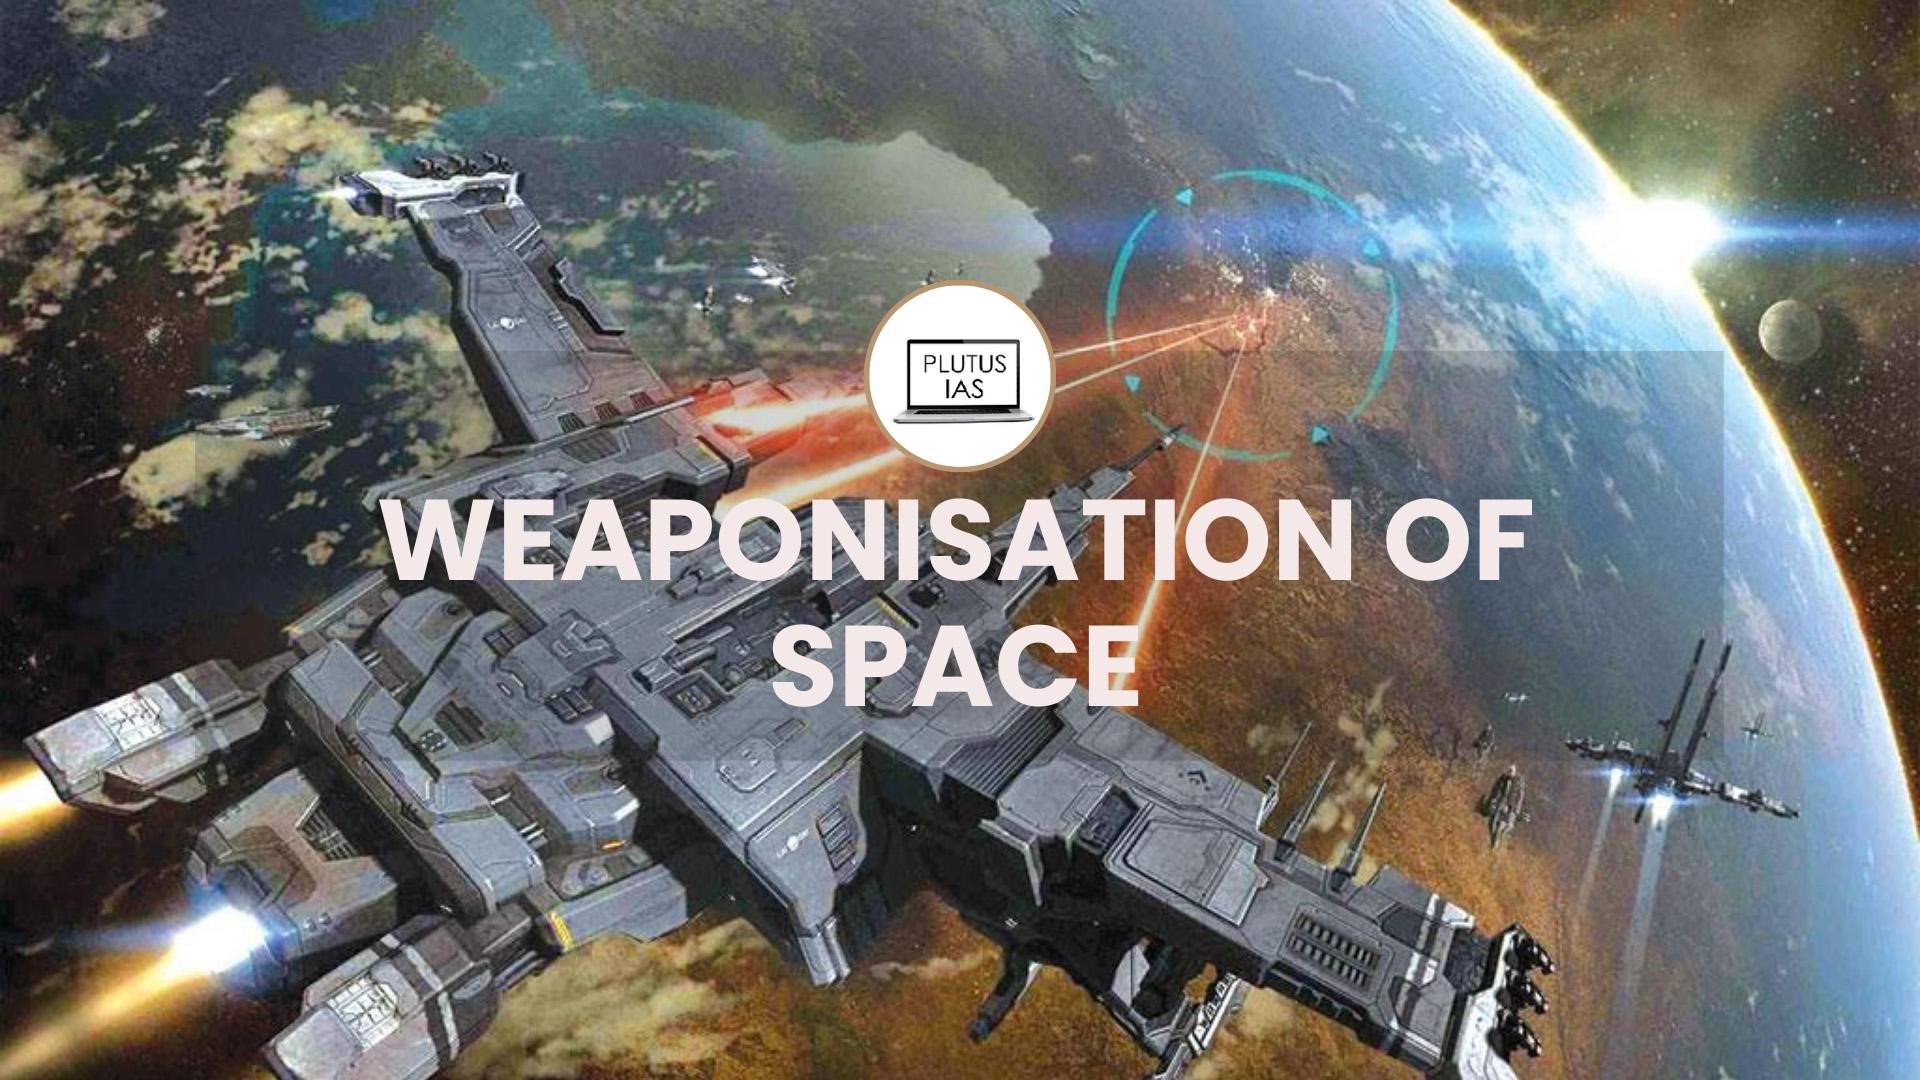 Weaponisation of space